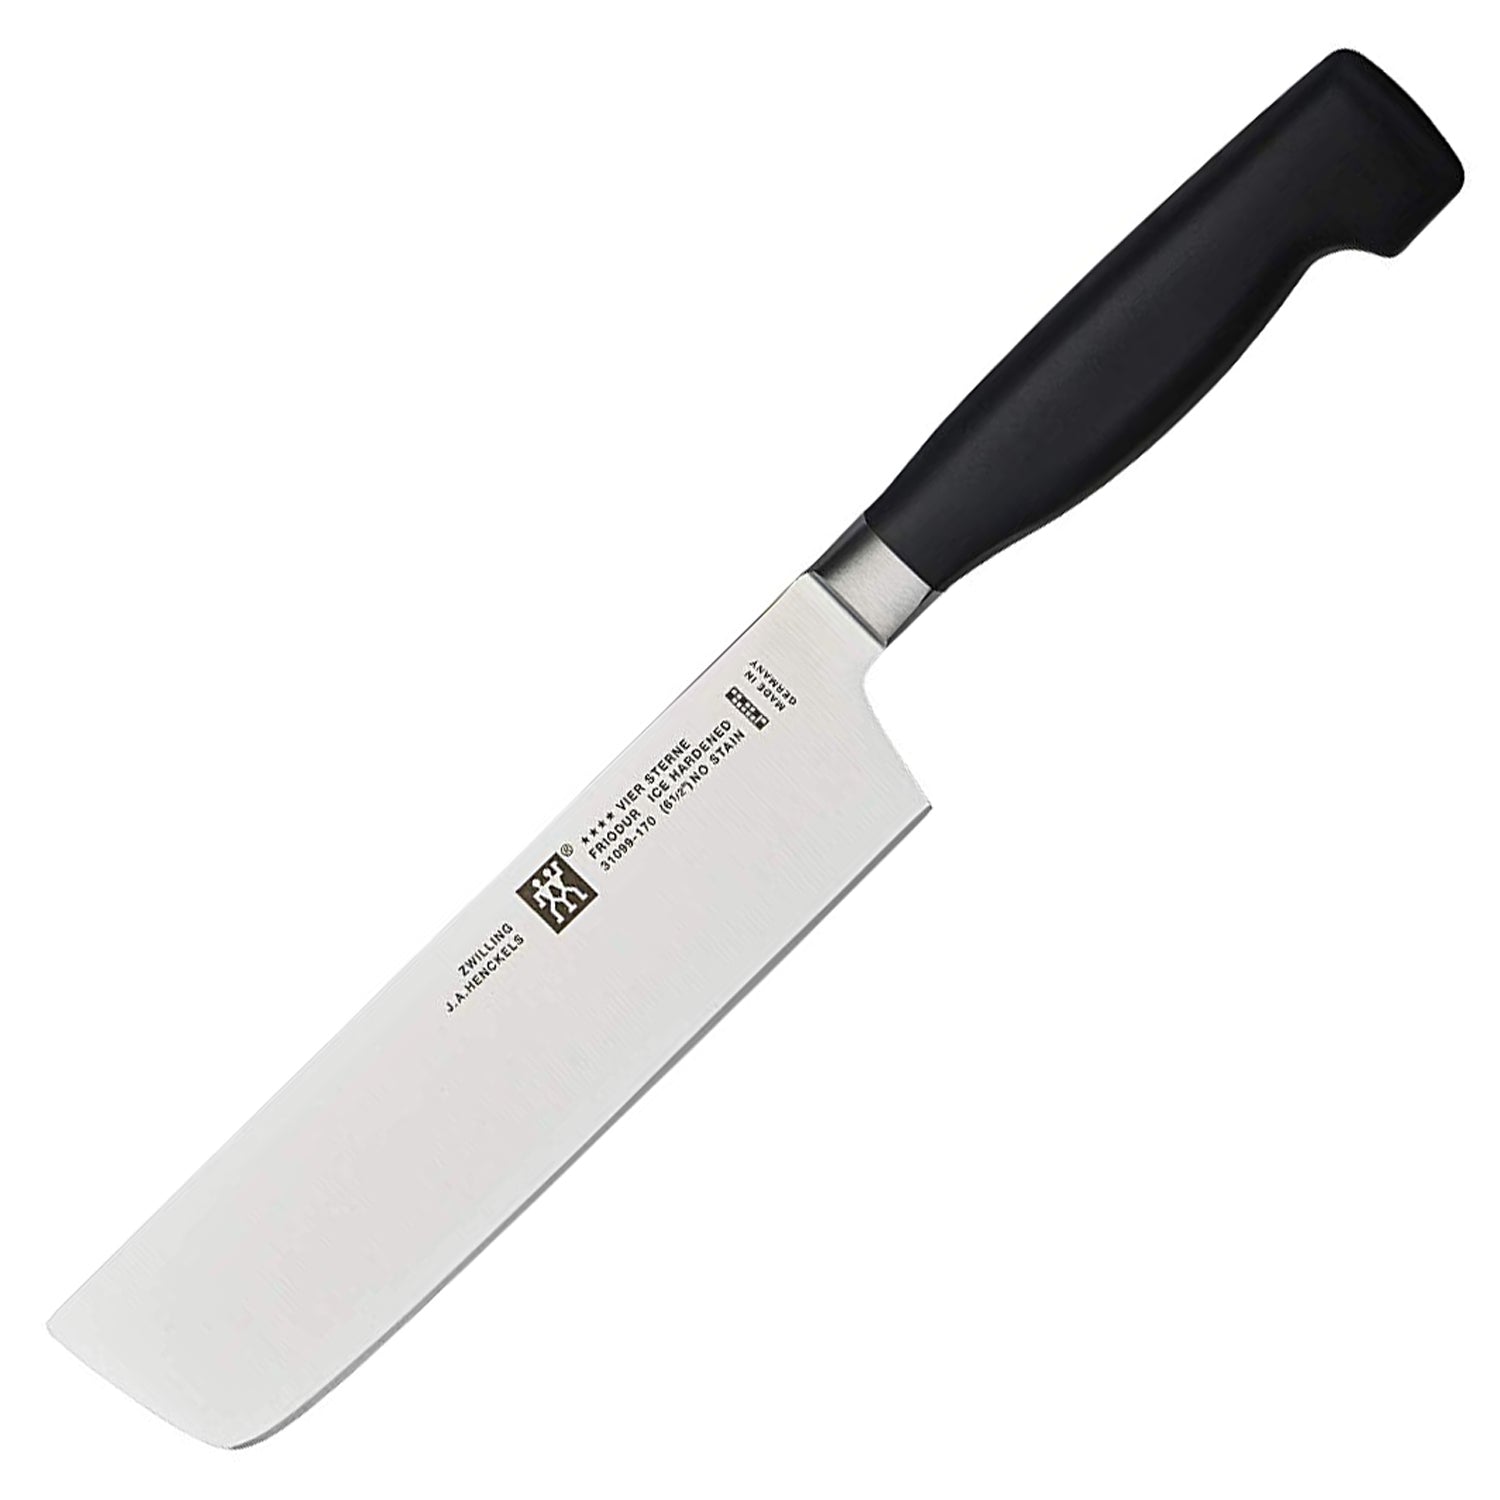 ZWILLING Gourmet 10-inch, Bread / Pastry Knife